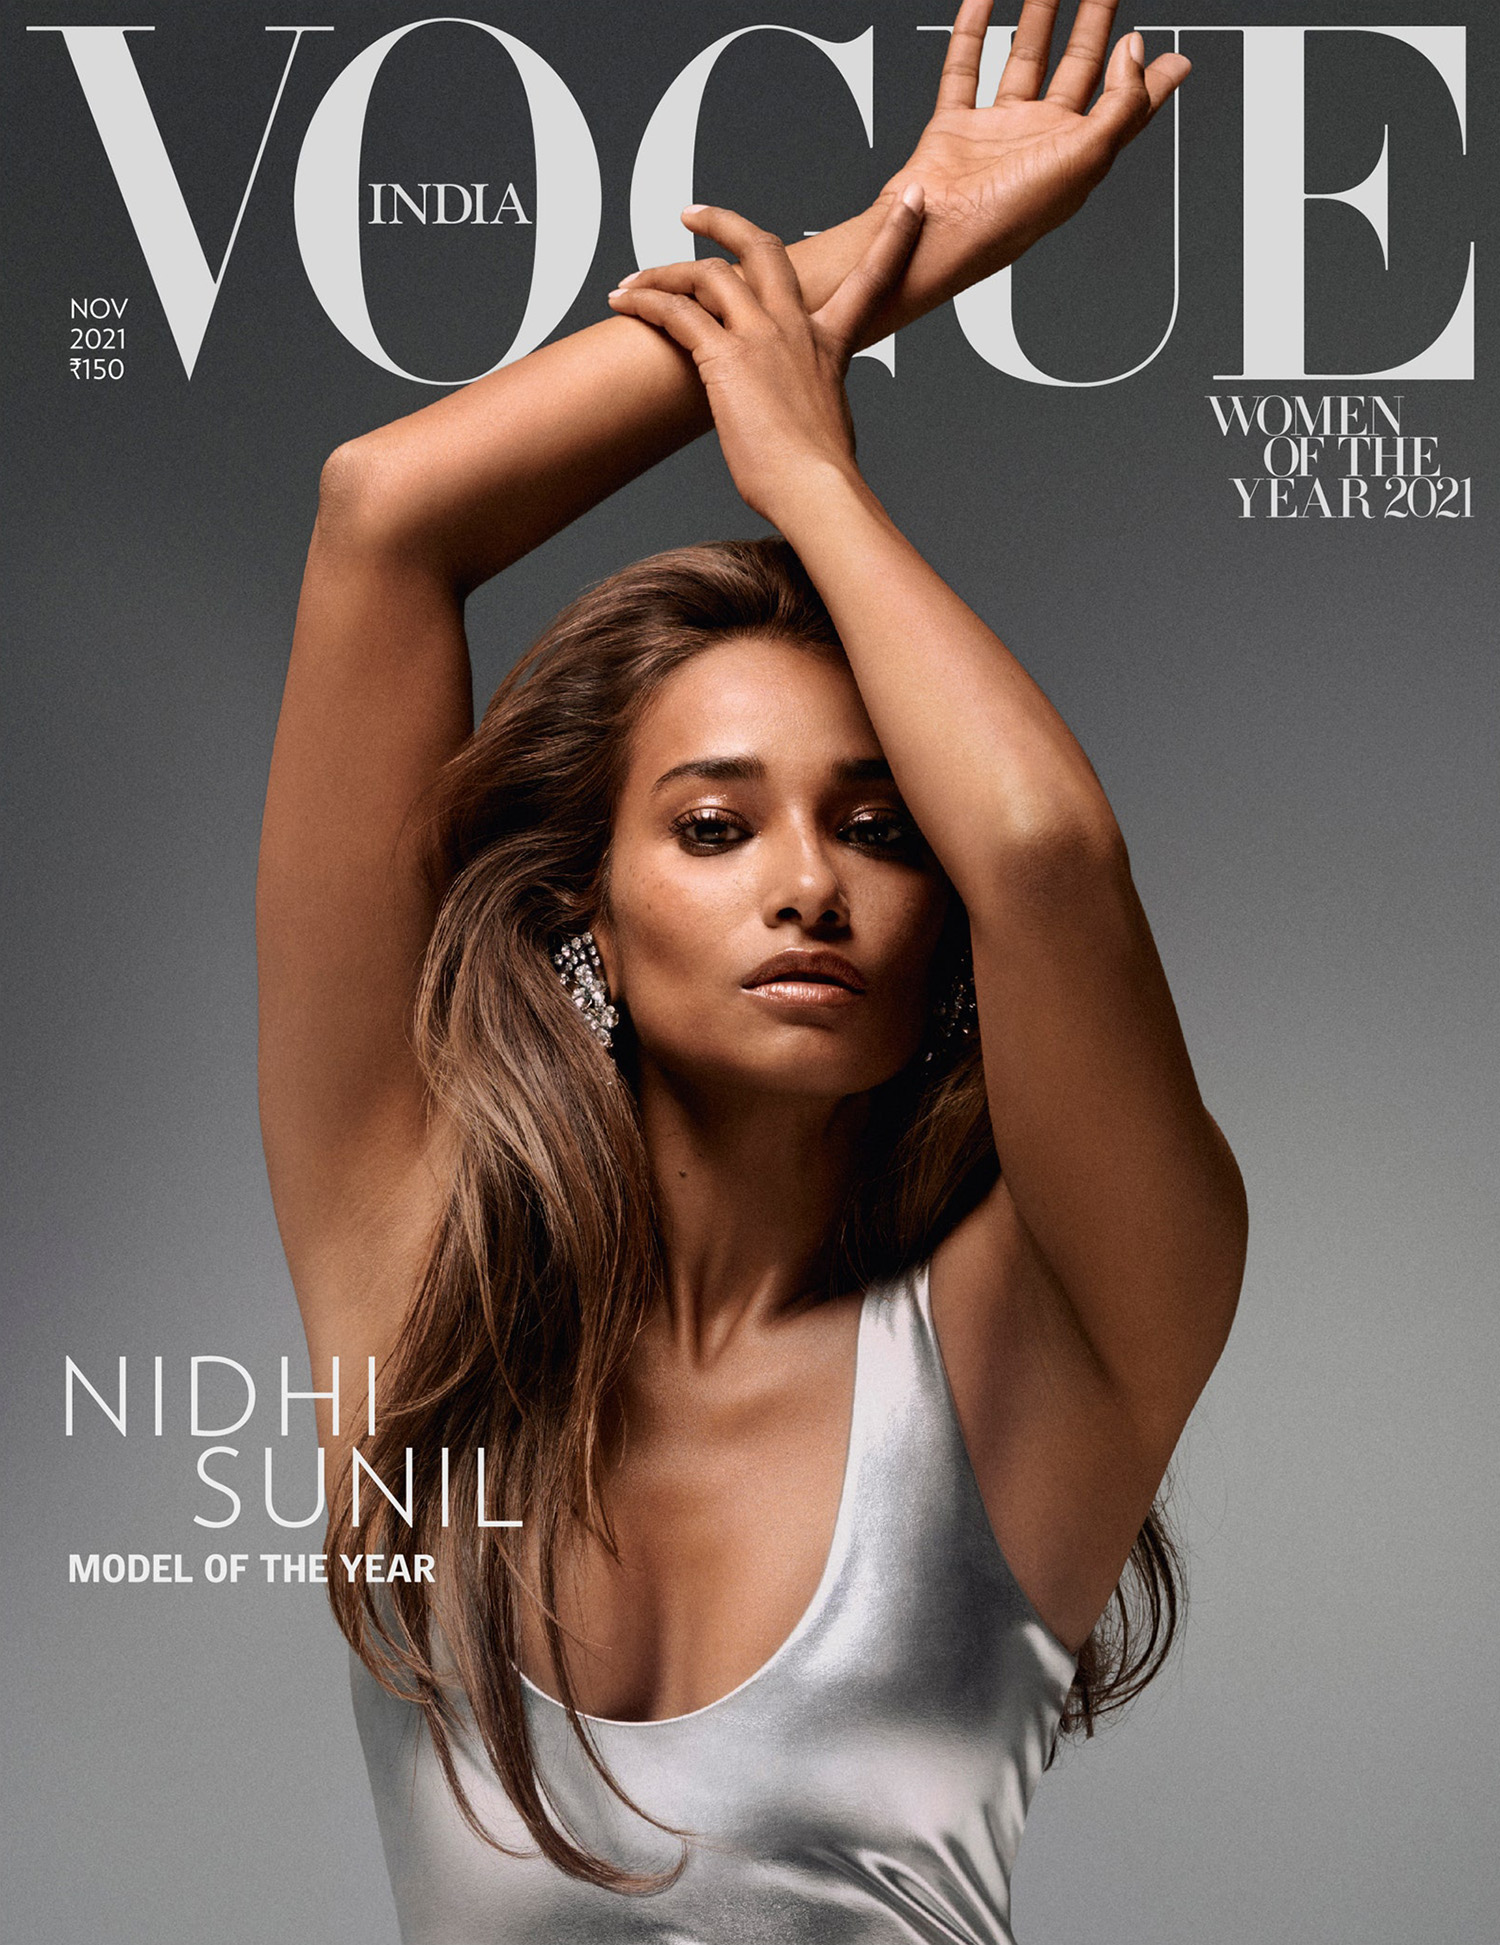 Nidhi Sunil covers Vogue India November 2021 by Pierre Debusschere